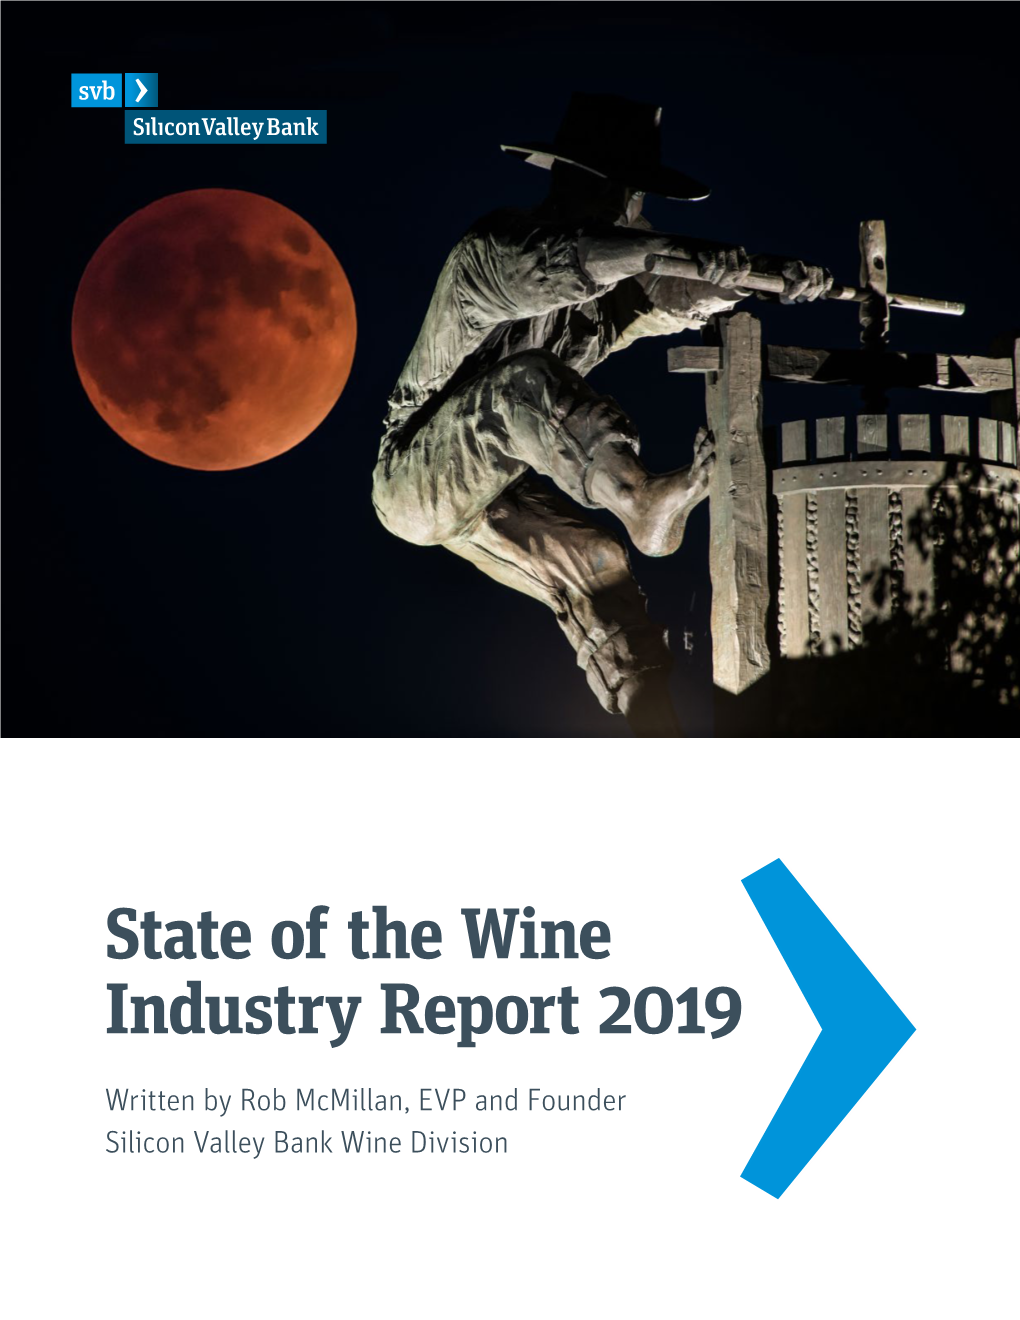 State of the Wine Industry Report 2019